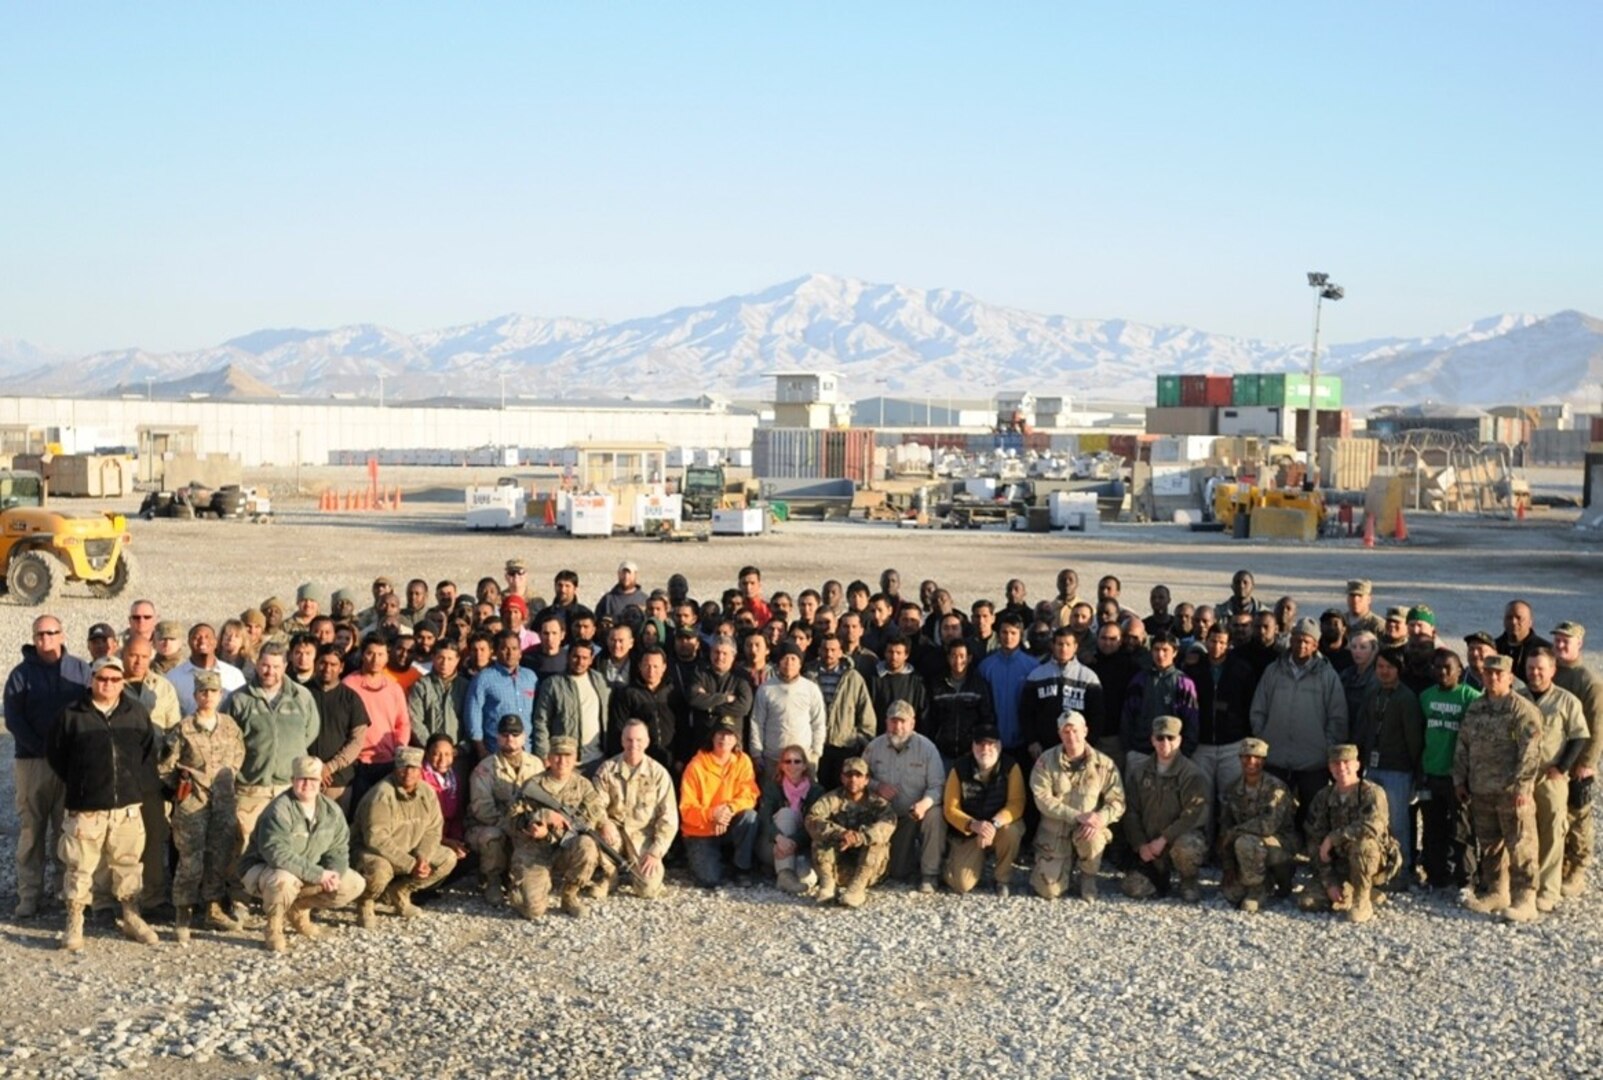 Large group of men and women from the DLA Support Team Afghanistan poses at the DLA Disposition Services yard in Bagram, Afghanistan.